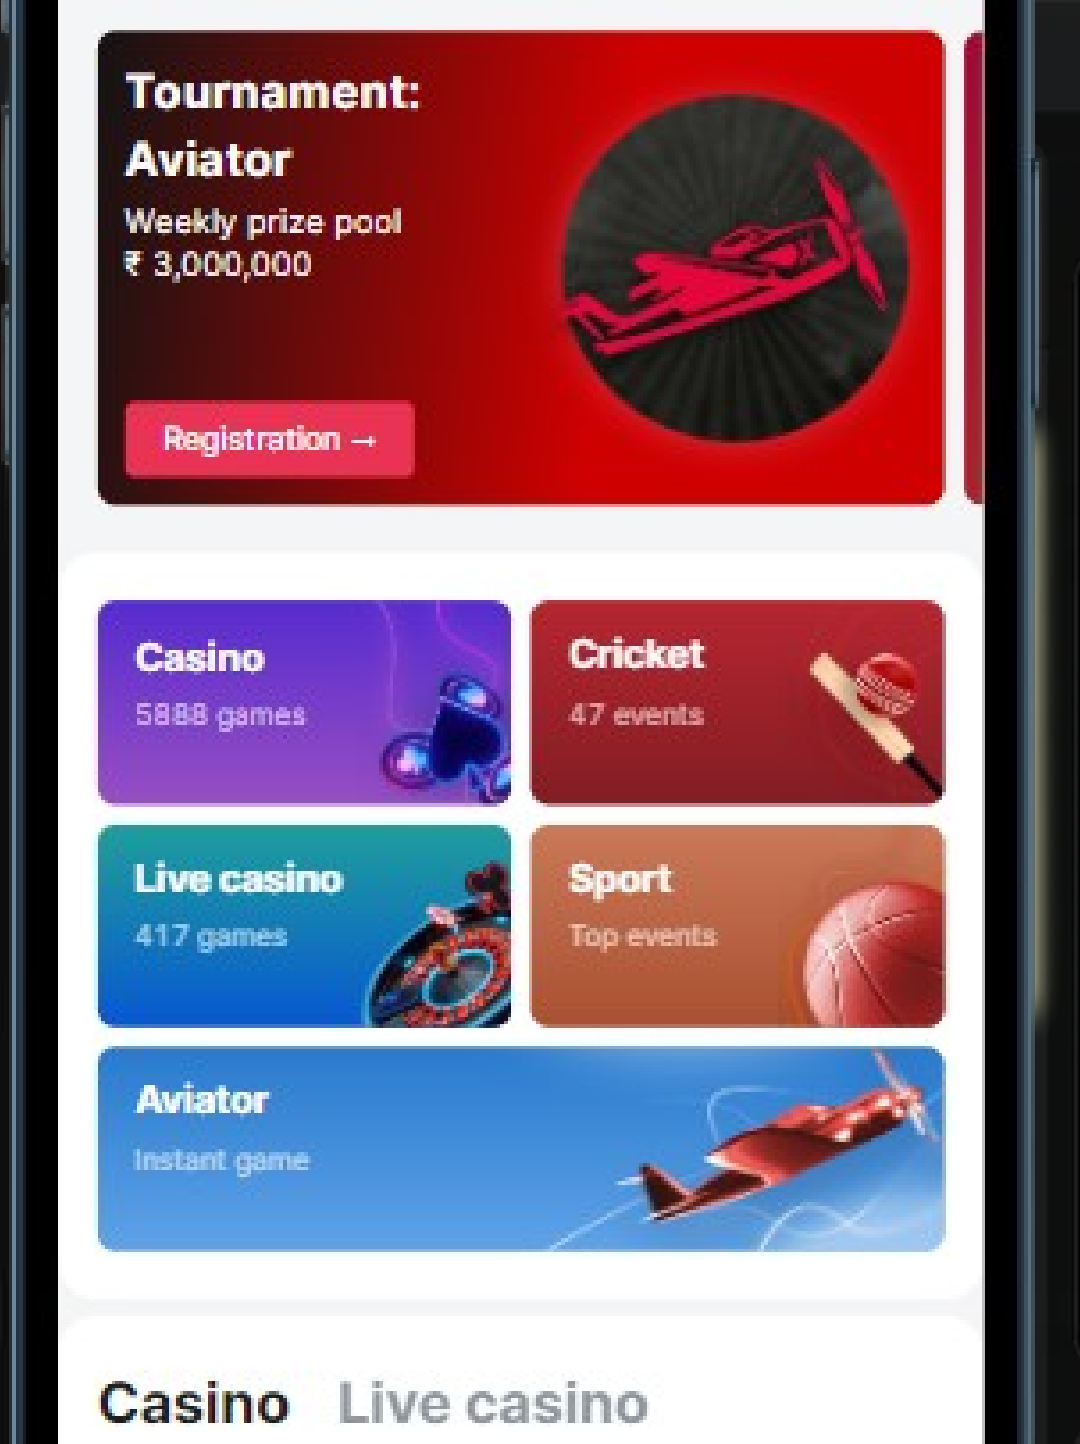 A smartphone displaying casino site with promo banner 'Tournament: Aviator'